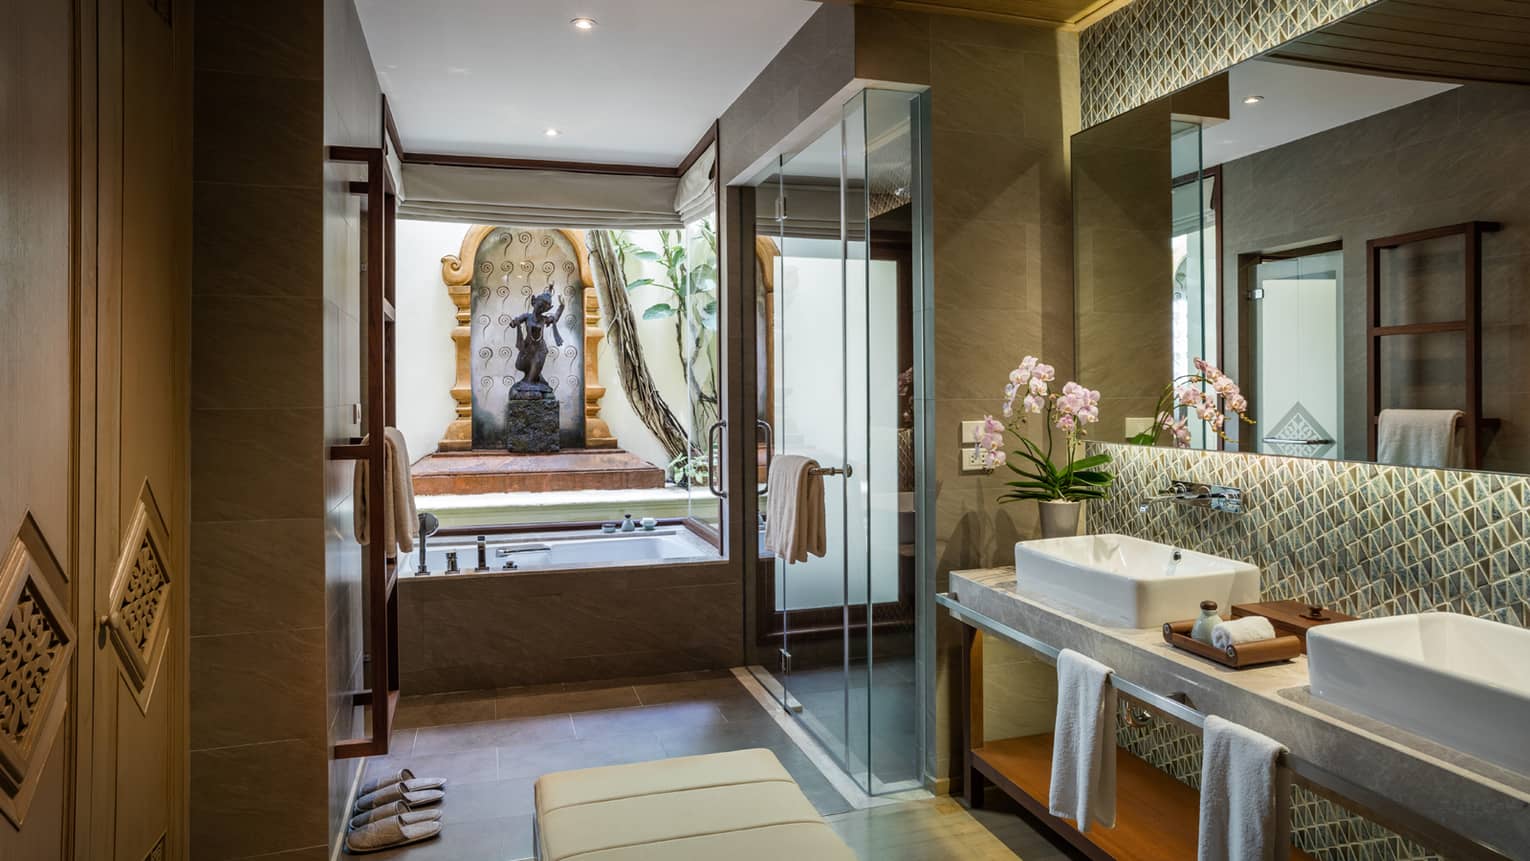 Garden Pavilion Room bathroom with double sink vanity, glass shower, tub under statue, monument